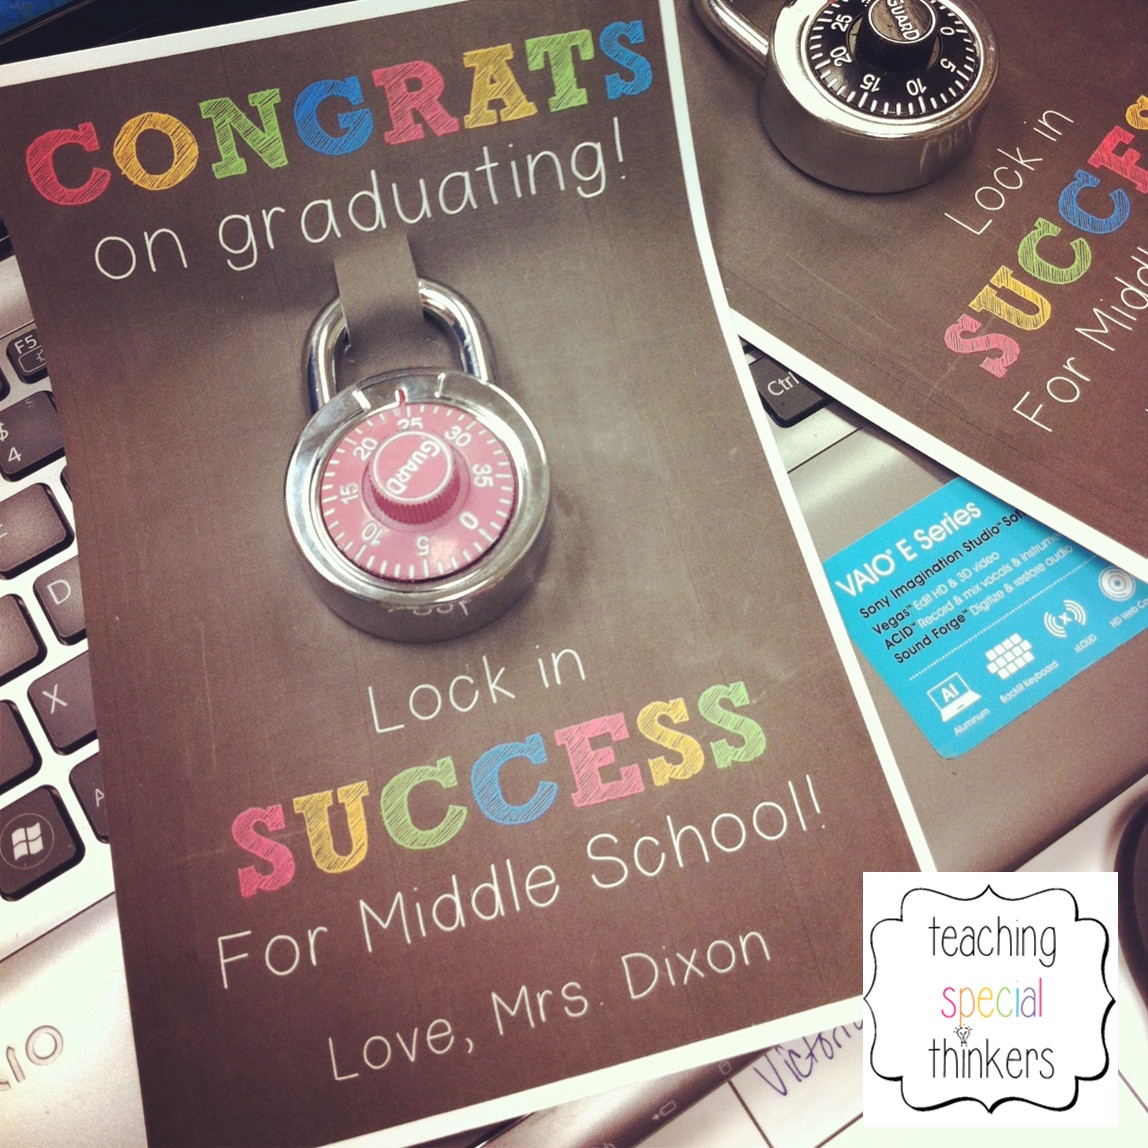 Elementary School Graduation Gift Ideas
 Lock in Success – Student Gift for soon to be Middle